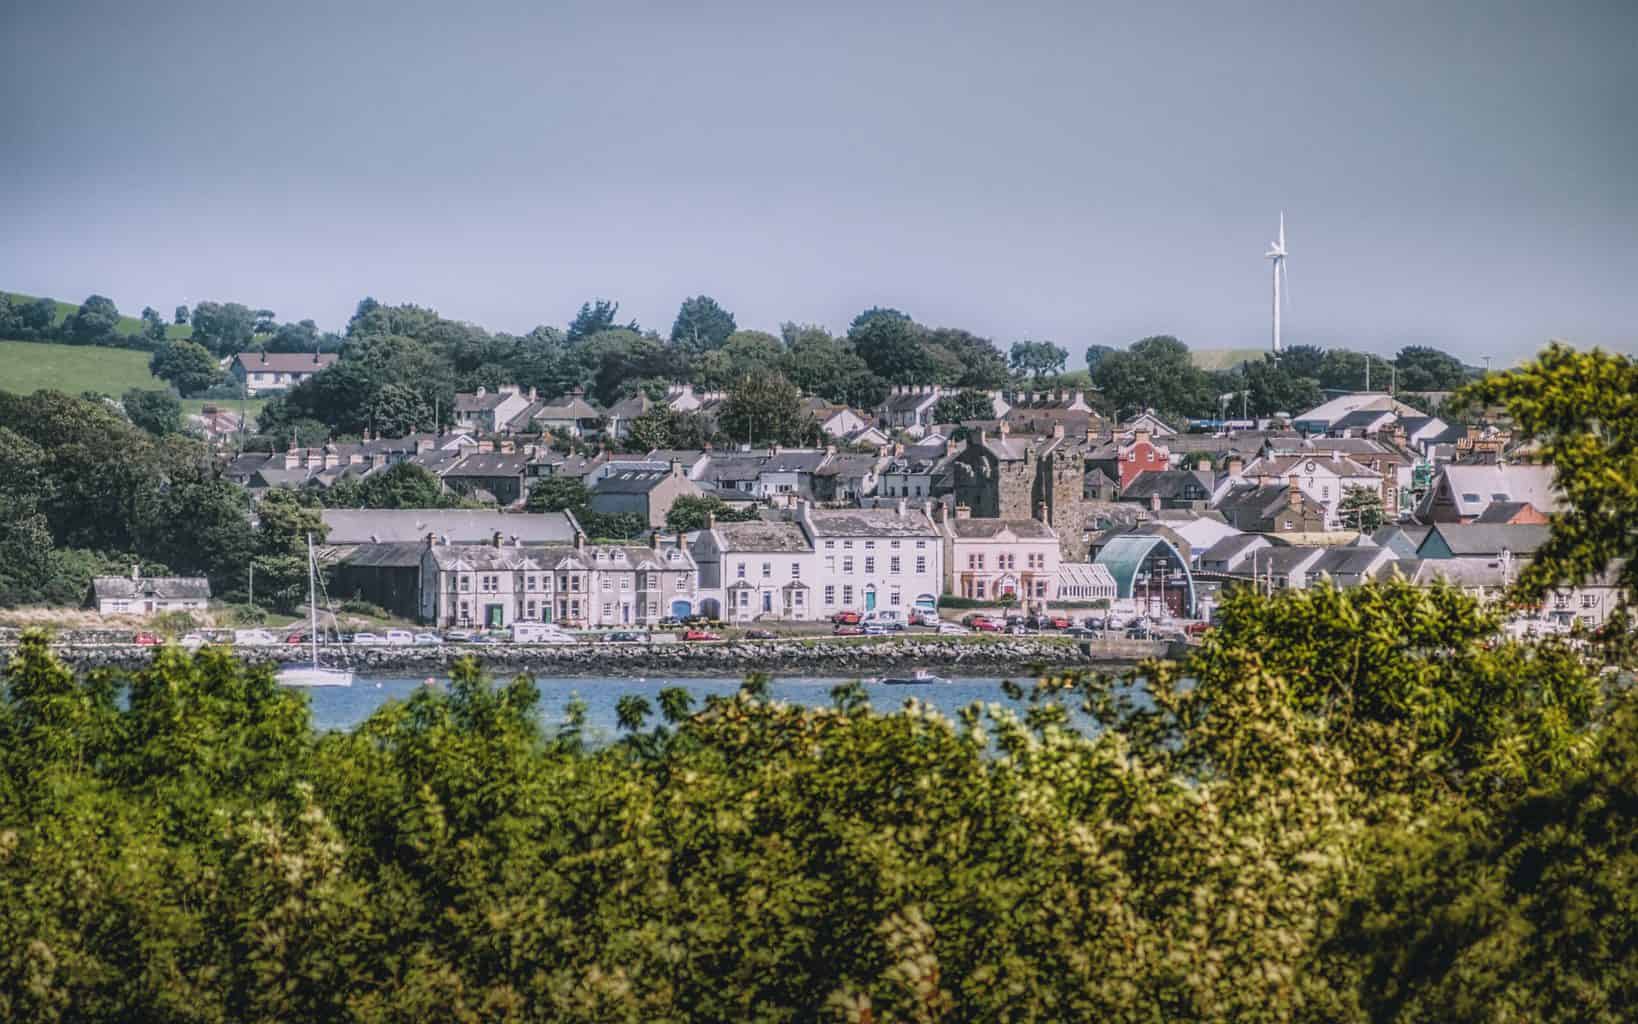 The wee town of Portaferry on the Ards Peninsula at Strangford Lough, taken from Castle Ward (July, 2019).